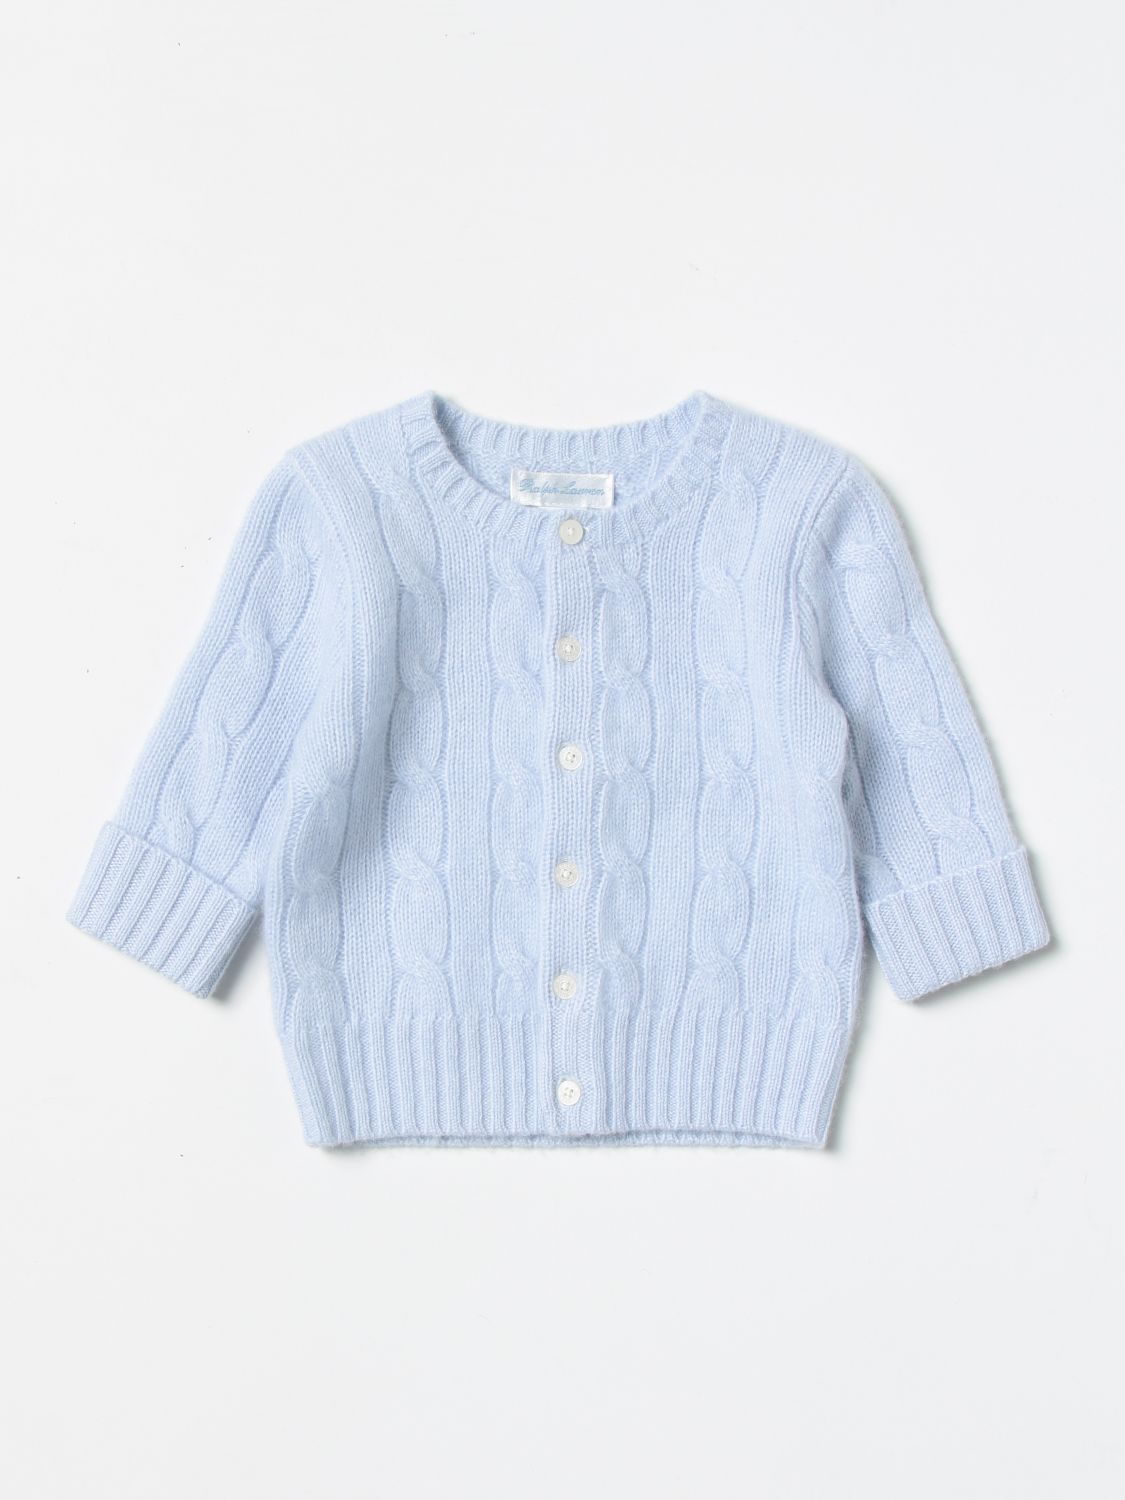 Polo Ralph Lauren Outlet: sweater for baby - Blue | Polo Ralph Lauren  sweater 320569229 online on 